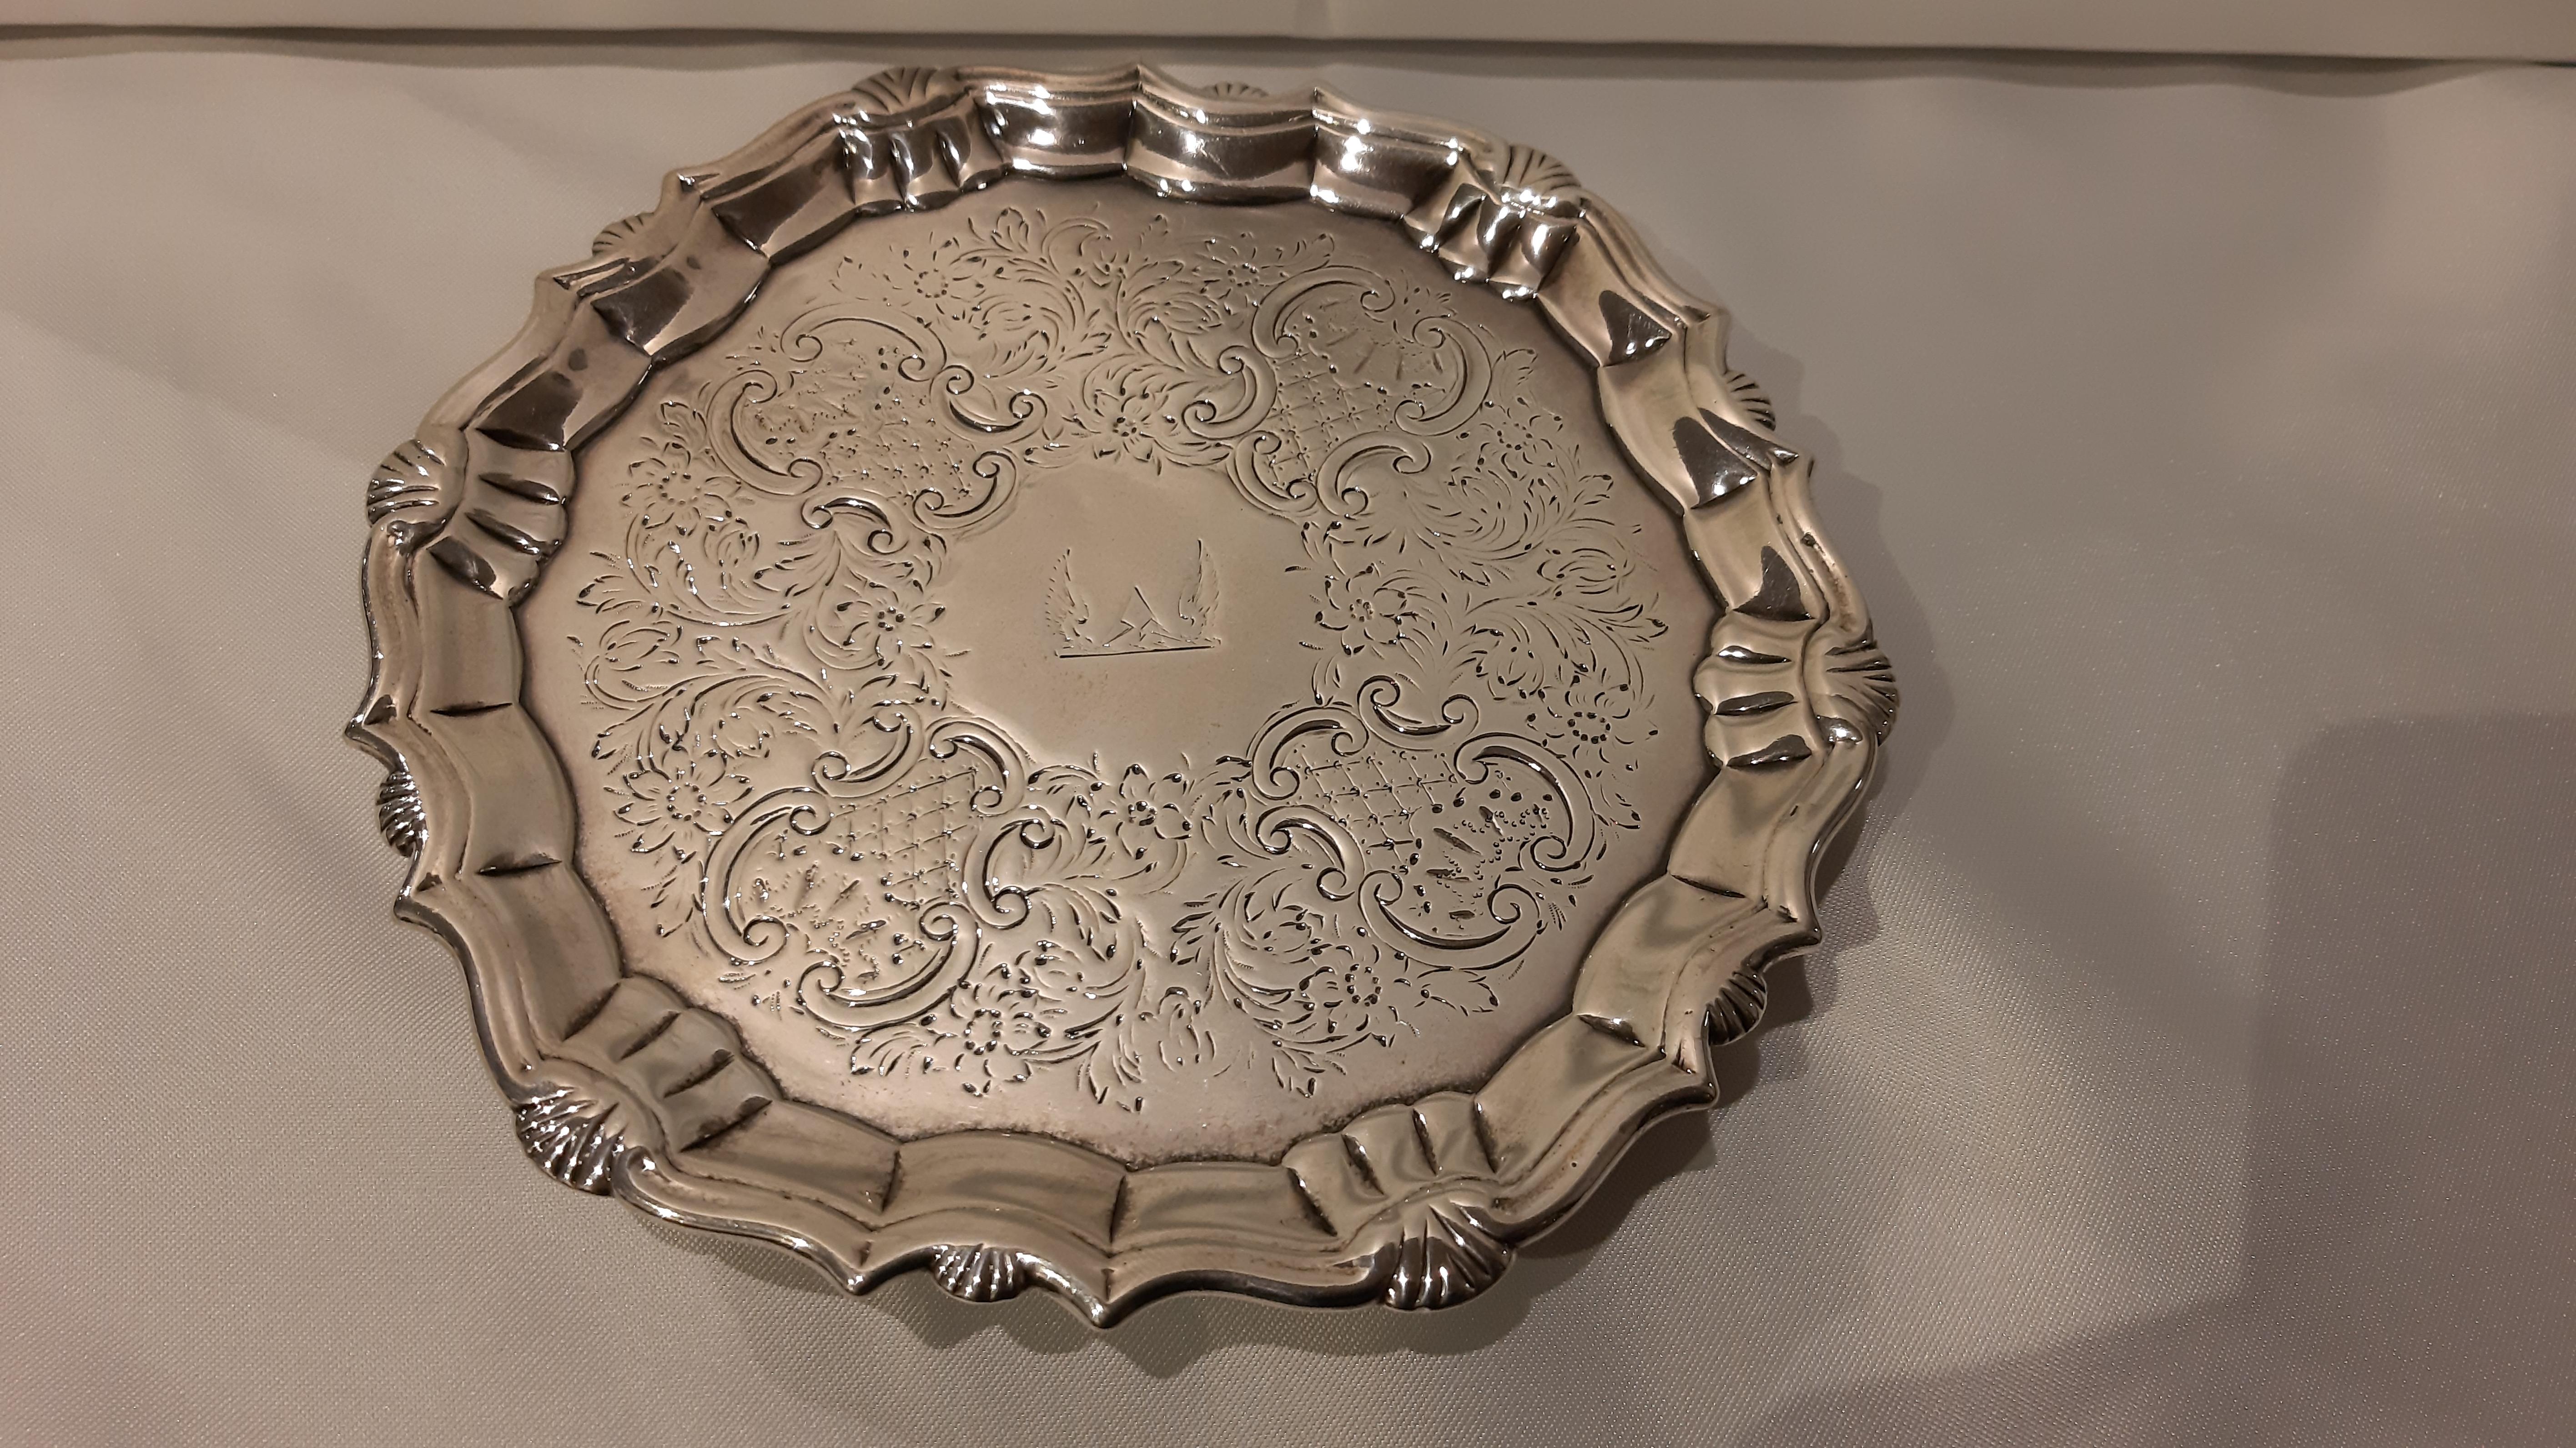 Antique silver salver backed with feet. Punches by silversmith R. Abercorn. In excellent condition, free from previous breakages or restorations, beautifully and completely chiseled in the central reserve.